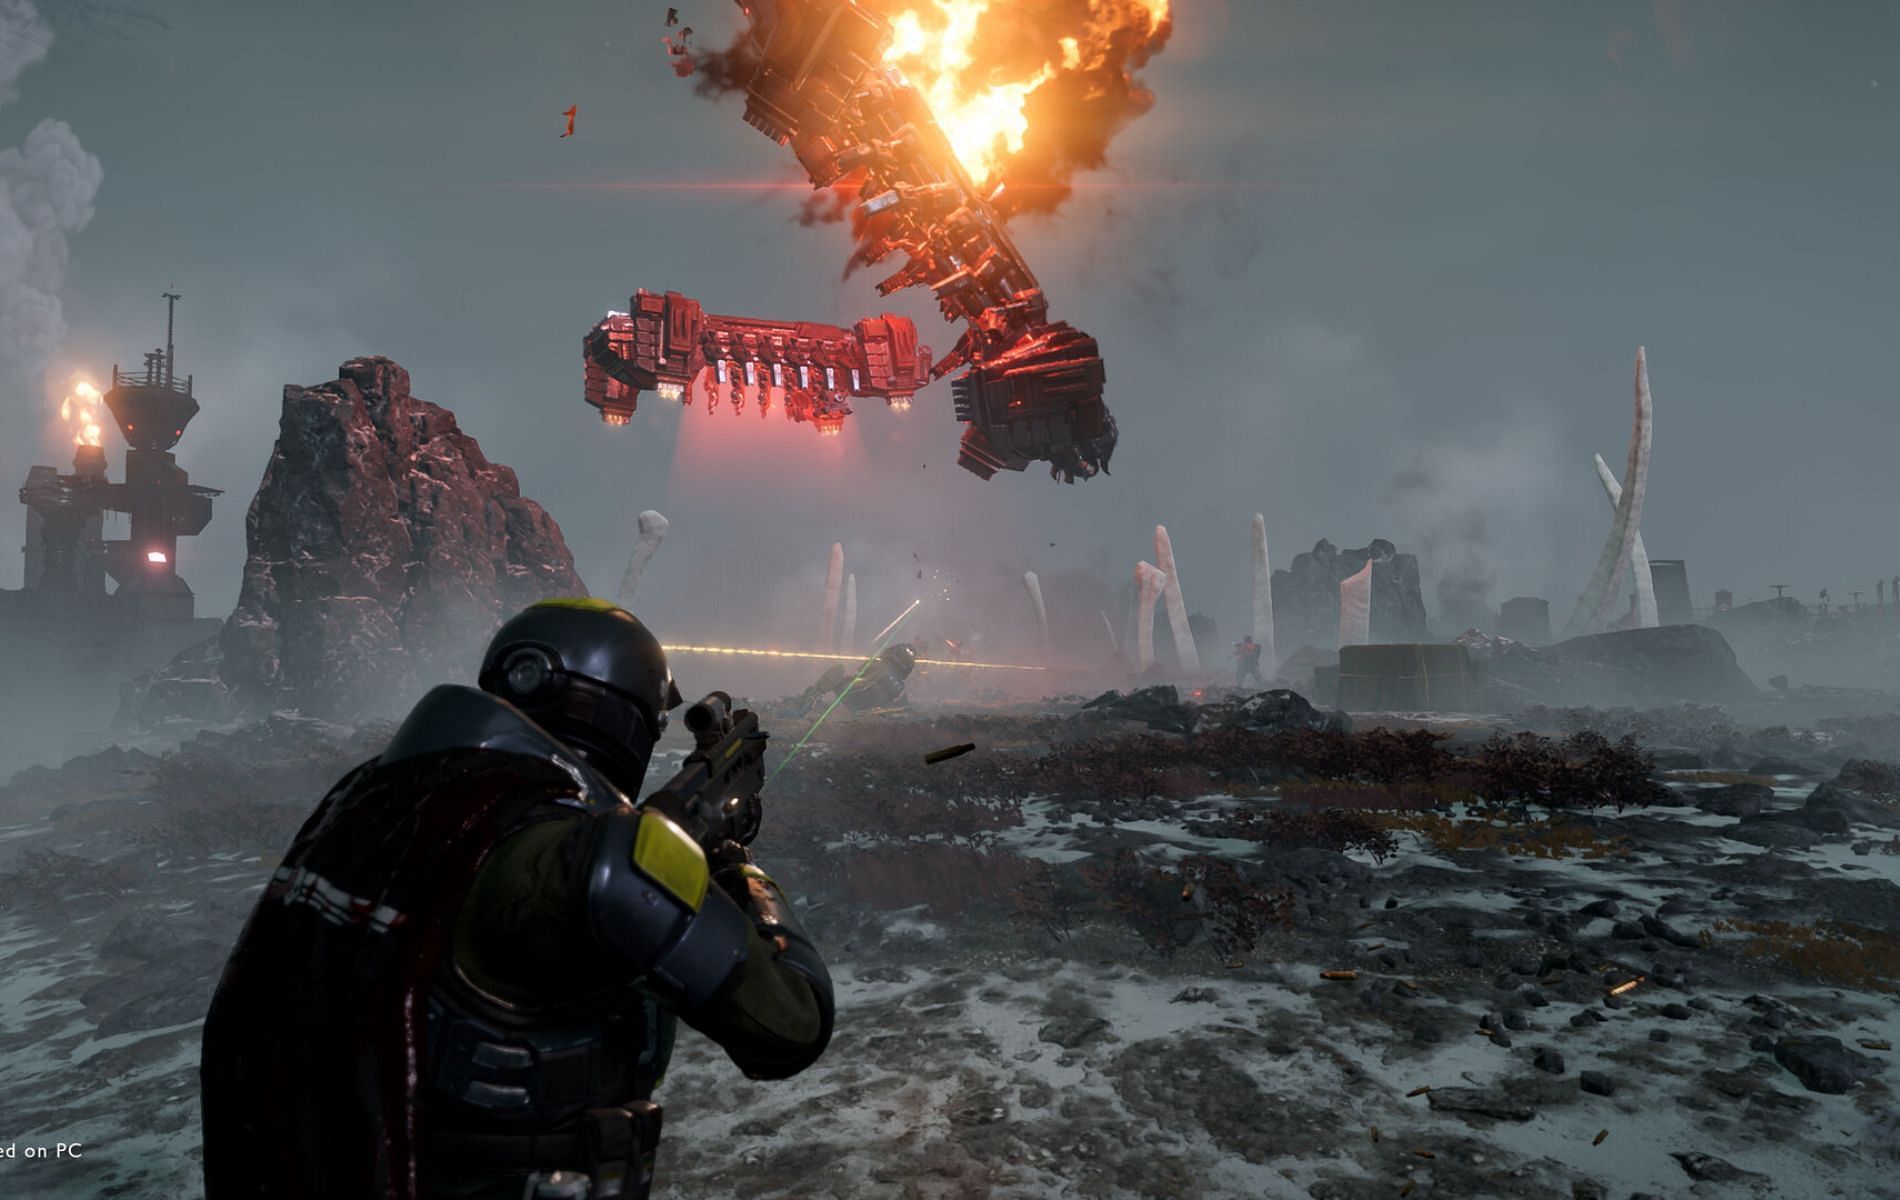 Image is from the game and this article is about checking if Helldivers 2 can be played offline